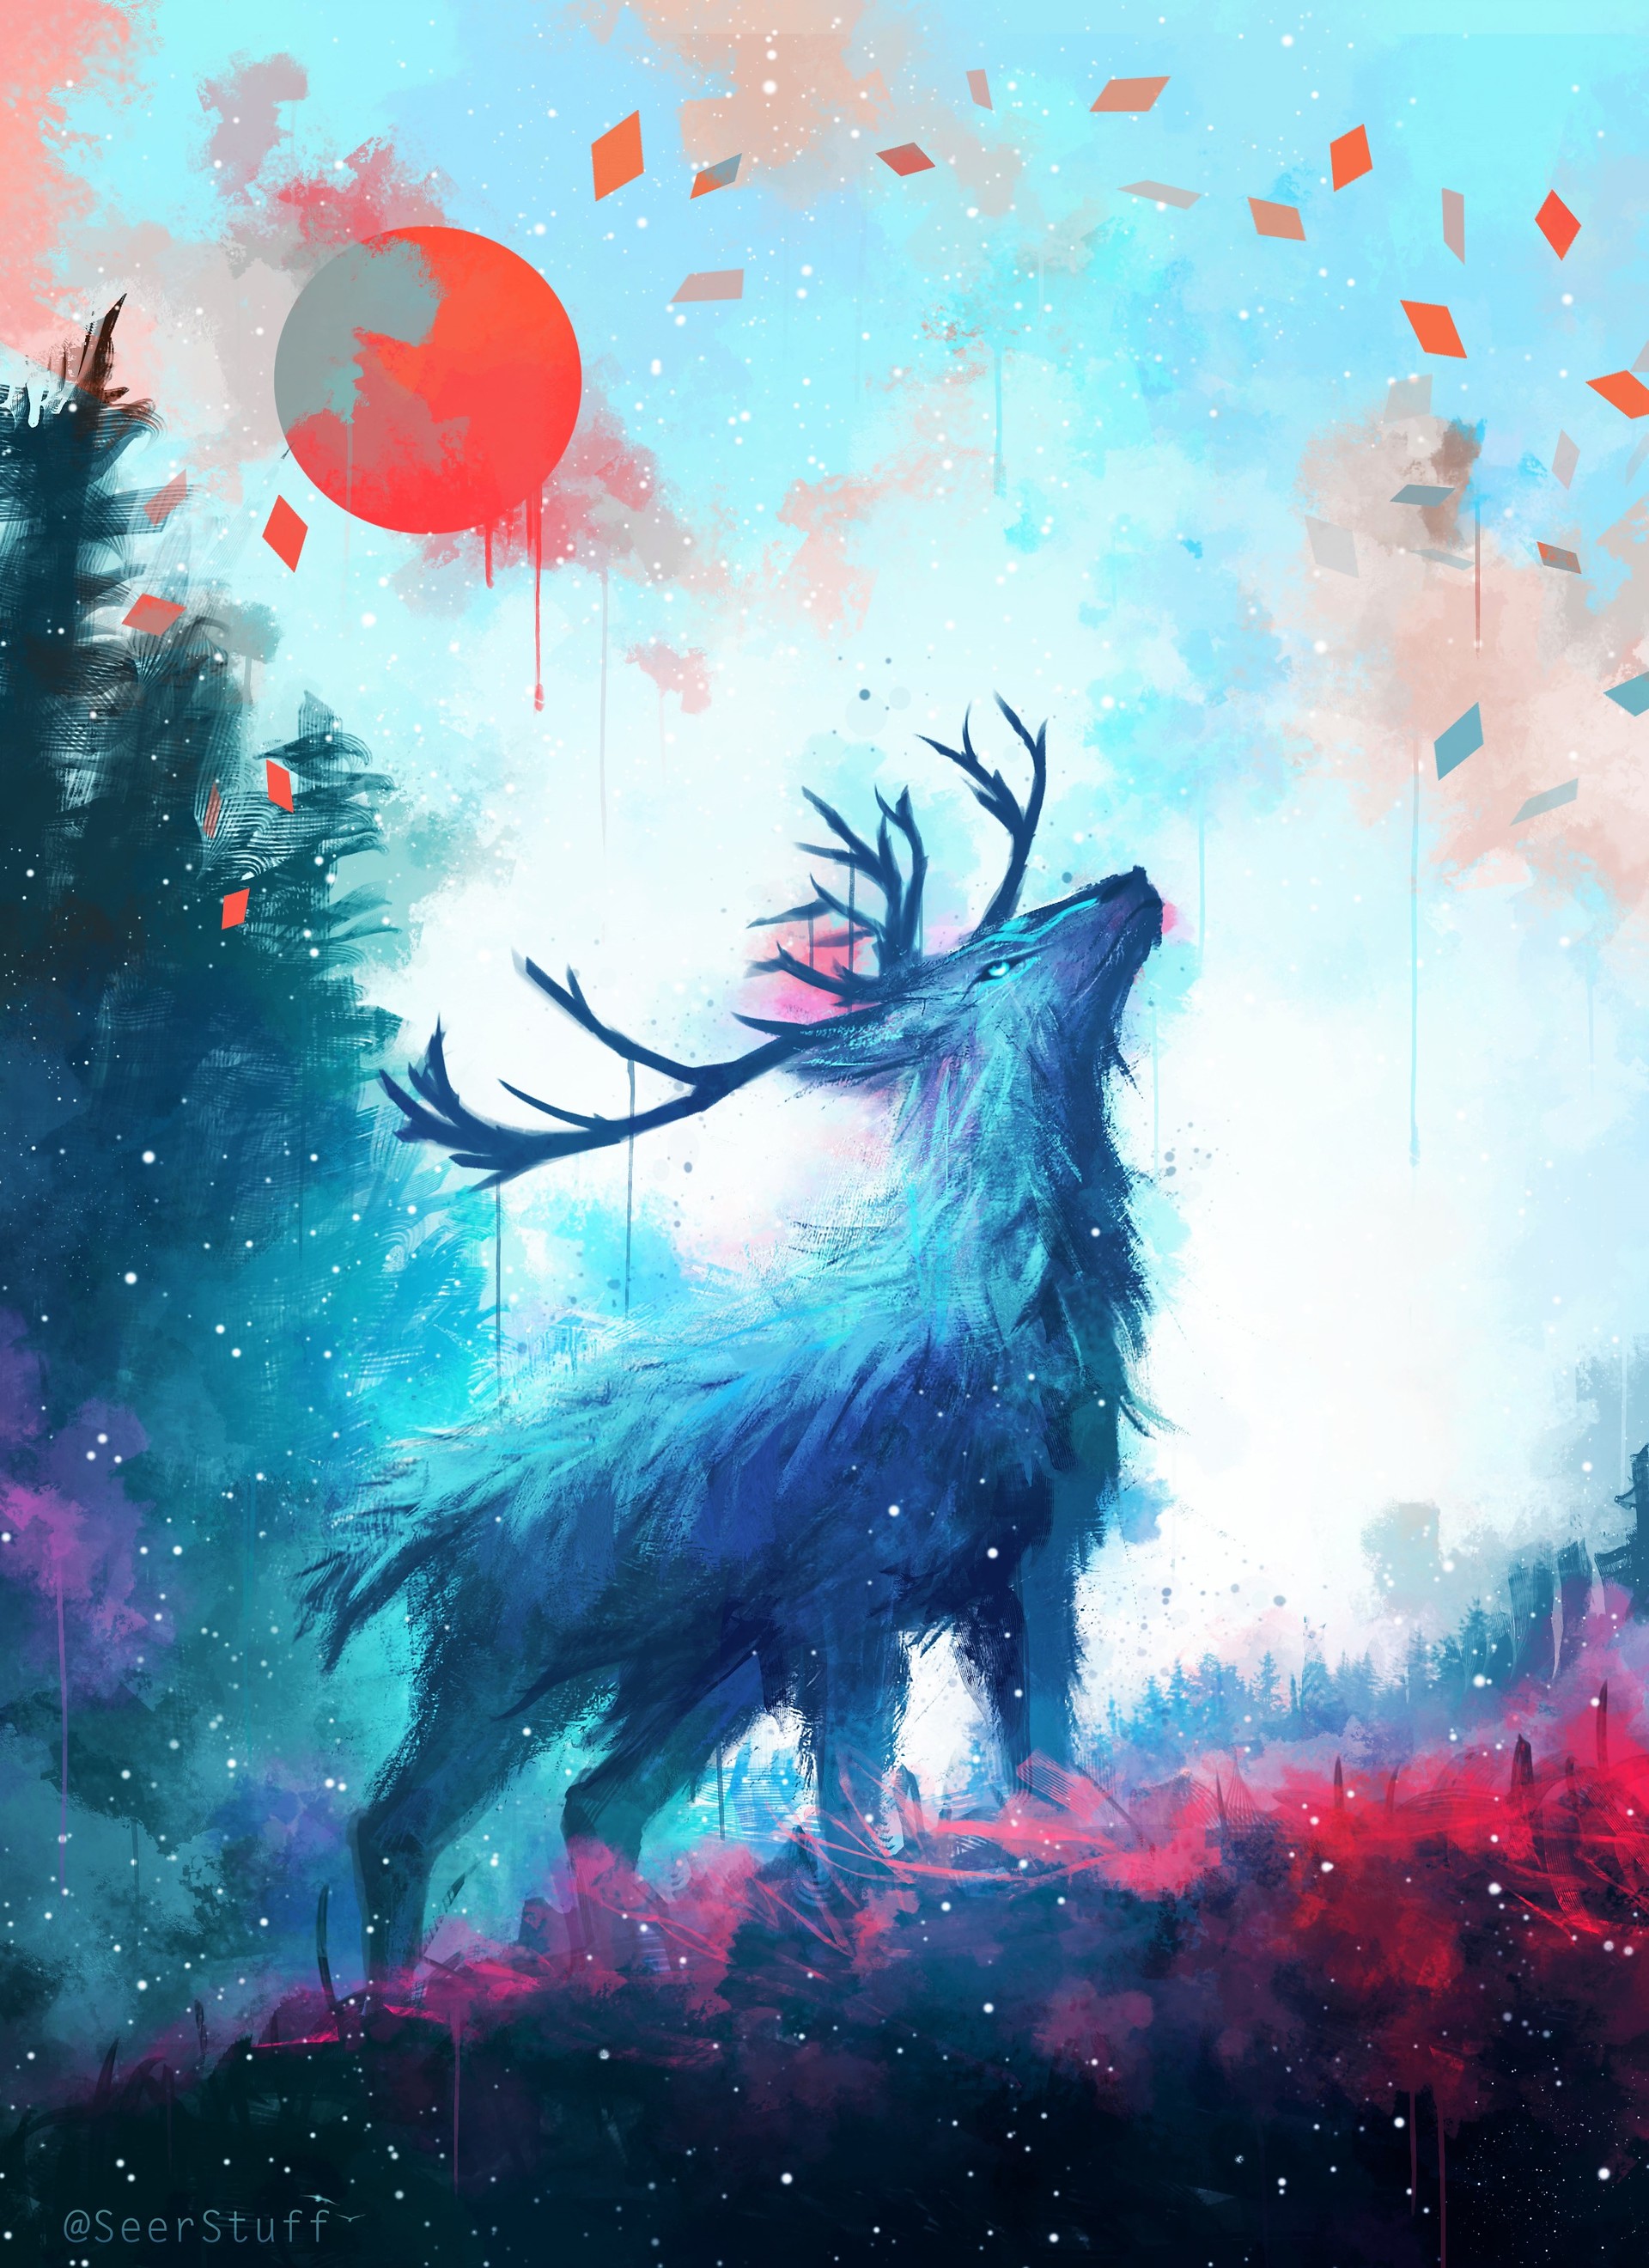 52515 free wallpaper 1080x2340 for phone, download images deer, drips, flow, art 1080x2340 for mobile